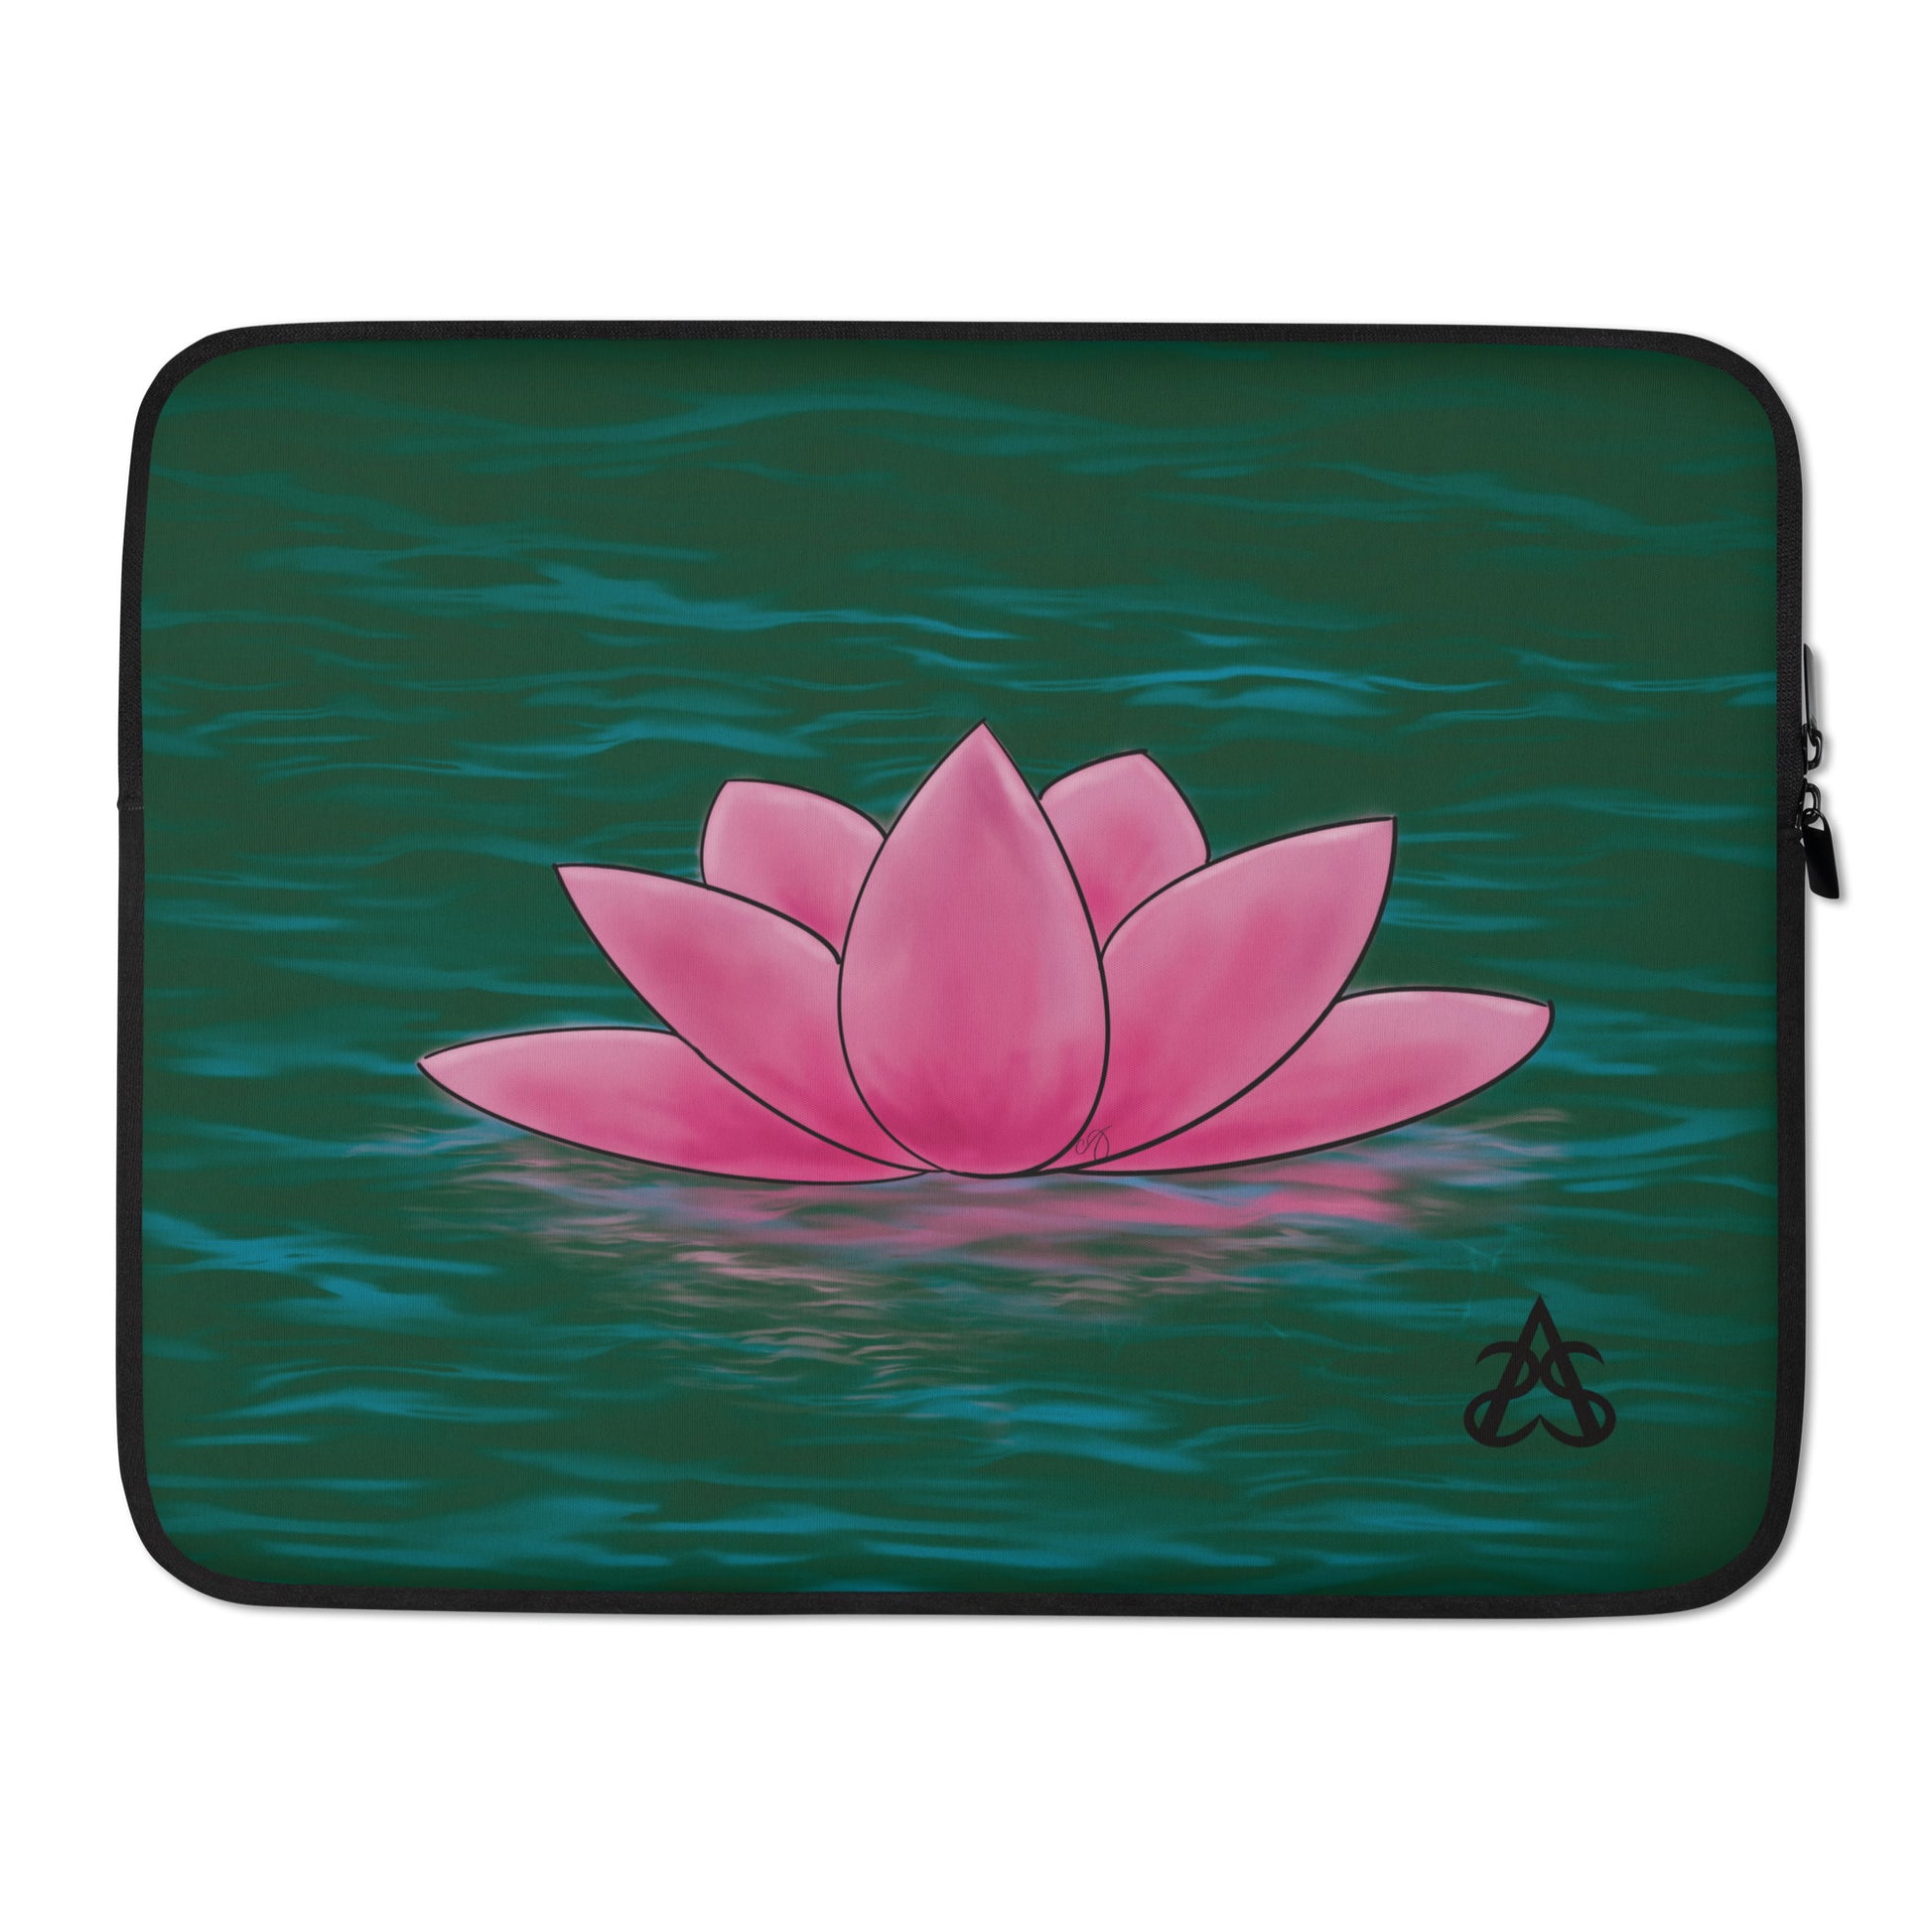 A laptop sleeve with a pink lotus flower on blue-green water.